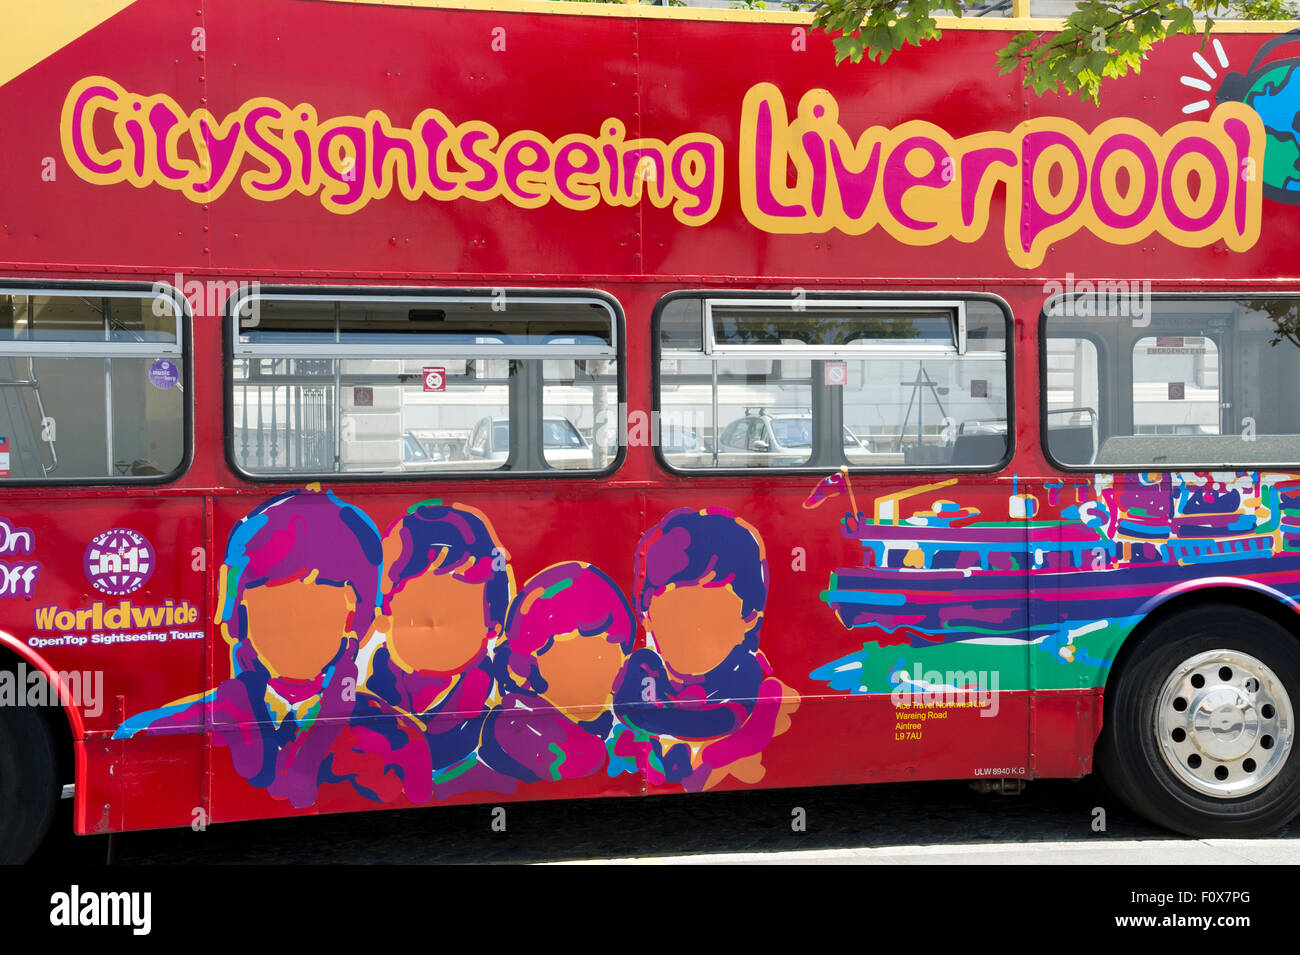 Liverpool, tourist bus with images of the Beatles pop group Stock Photo